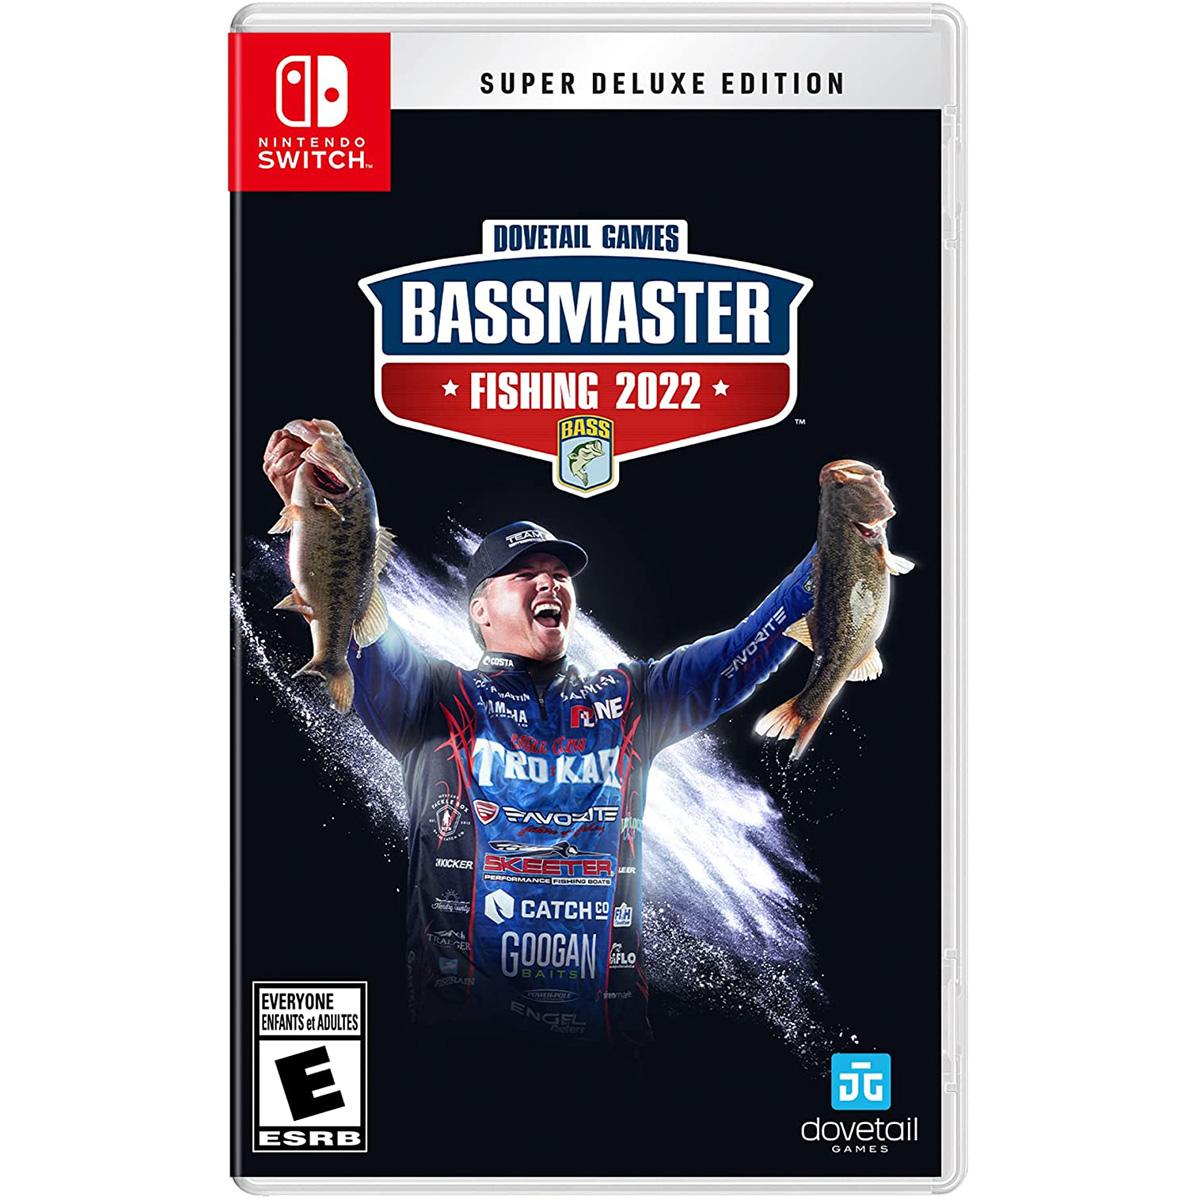 Bassmaster Fishing 2022: Super Deluxe Edition Switch for $19.99